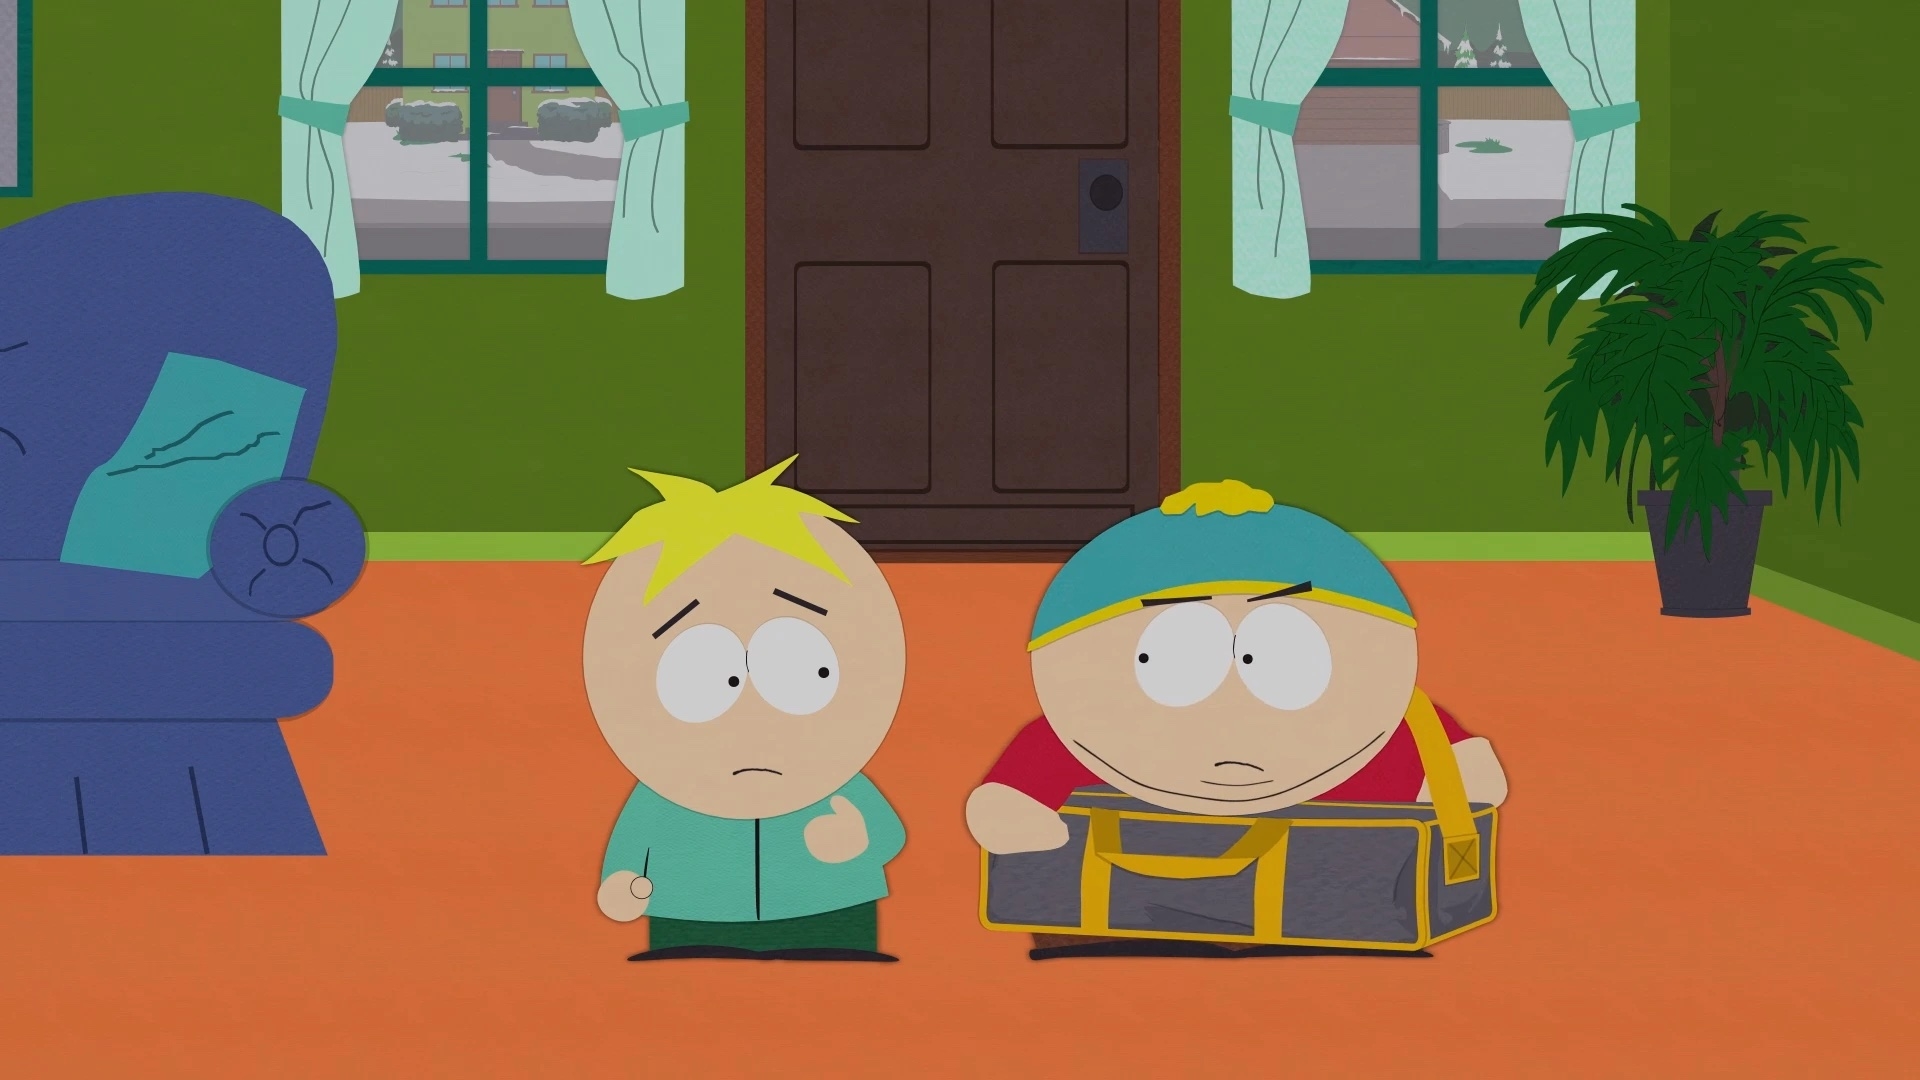 South Park finds new ways to make fun of “City People”